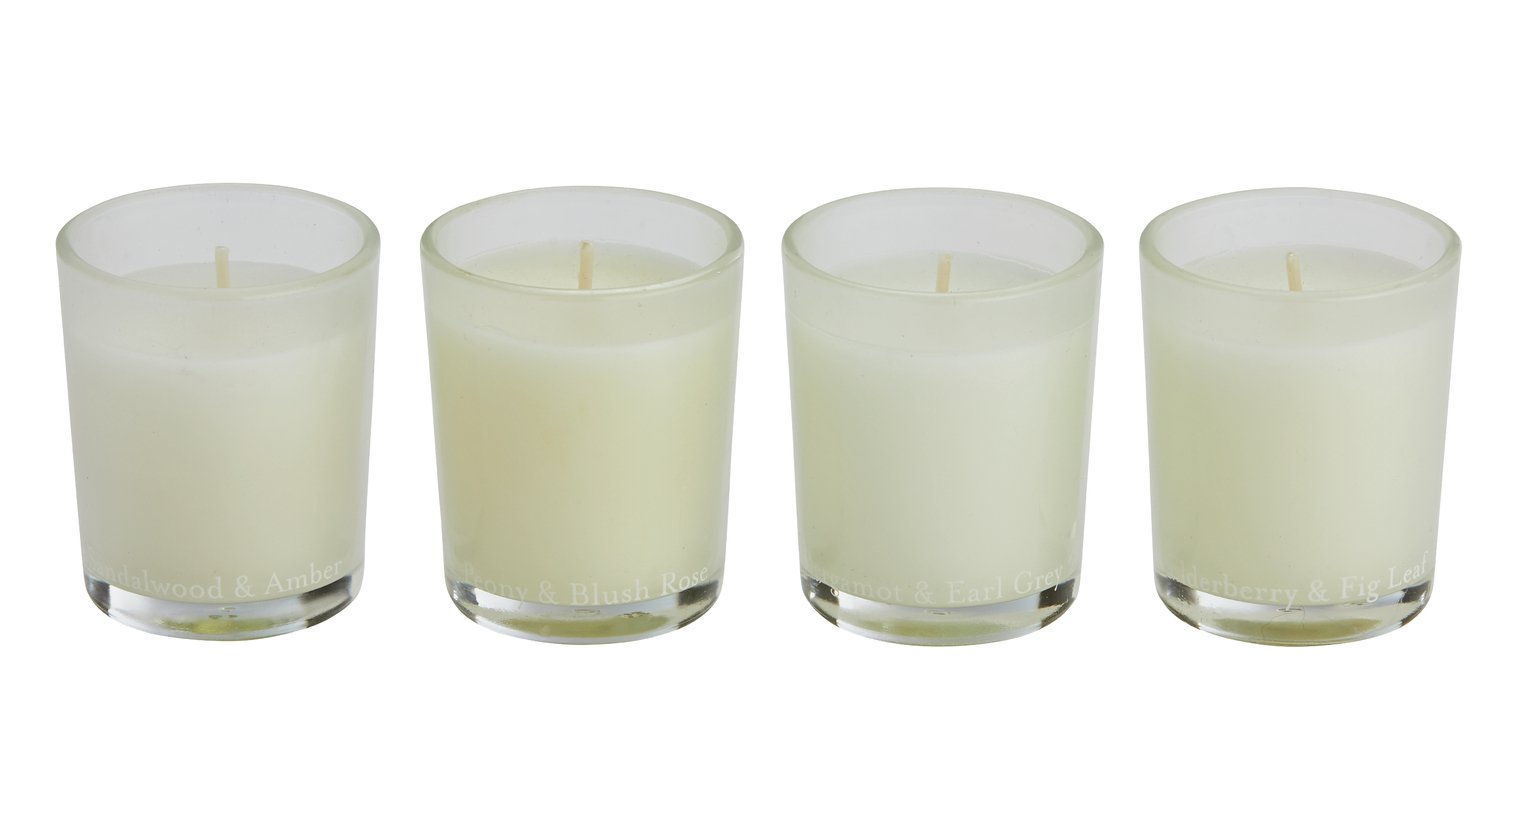 Sainsbury's Home Set of 4 Boxed Candles review